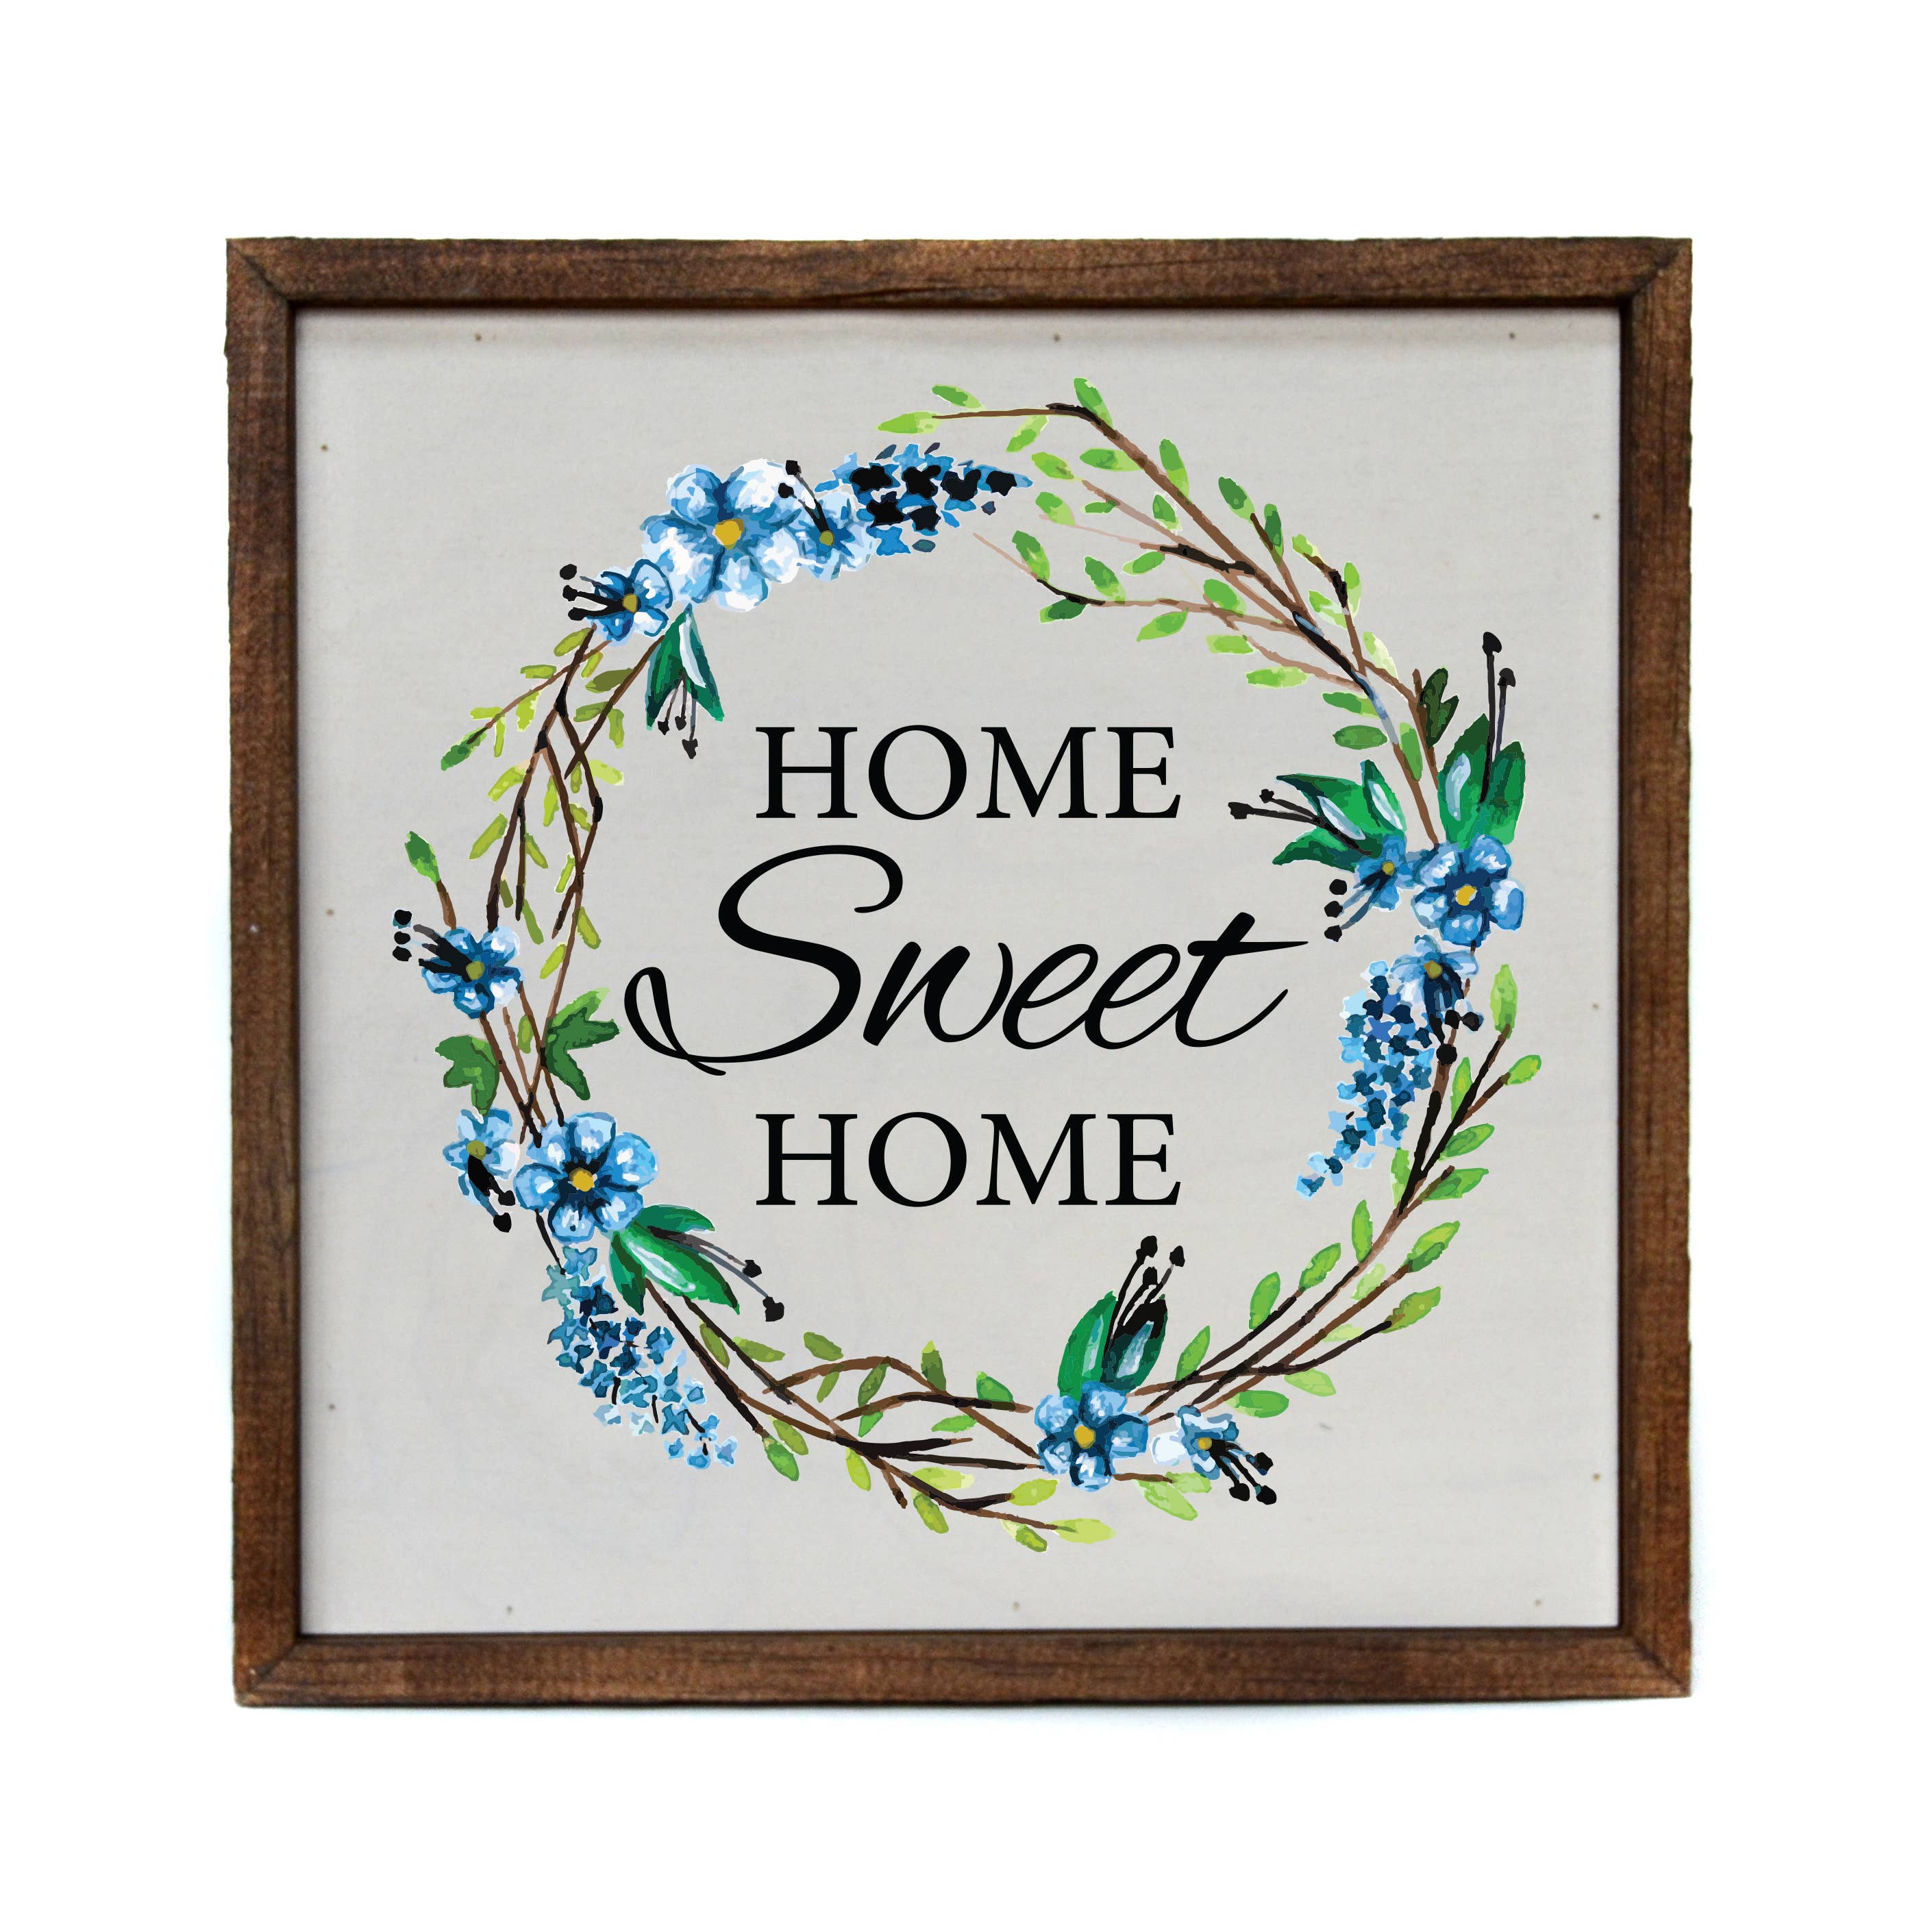 Home Sweet Home Wooden Box Sign